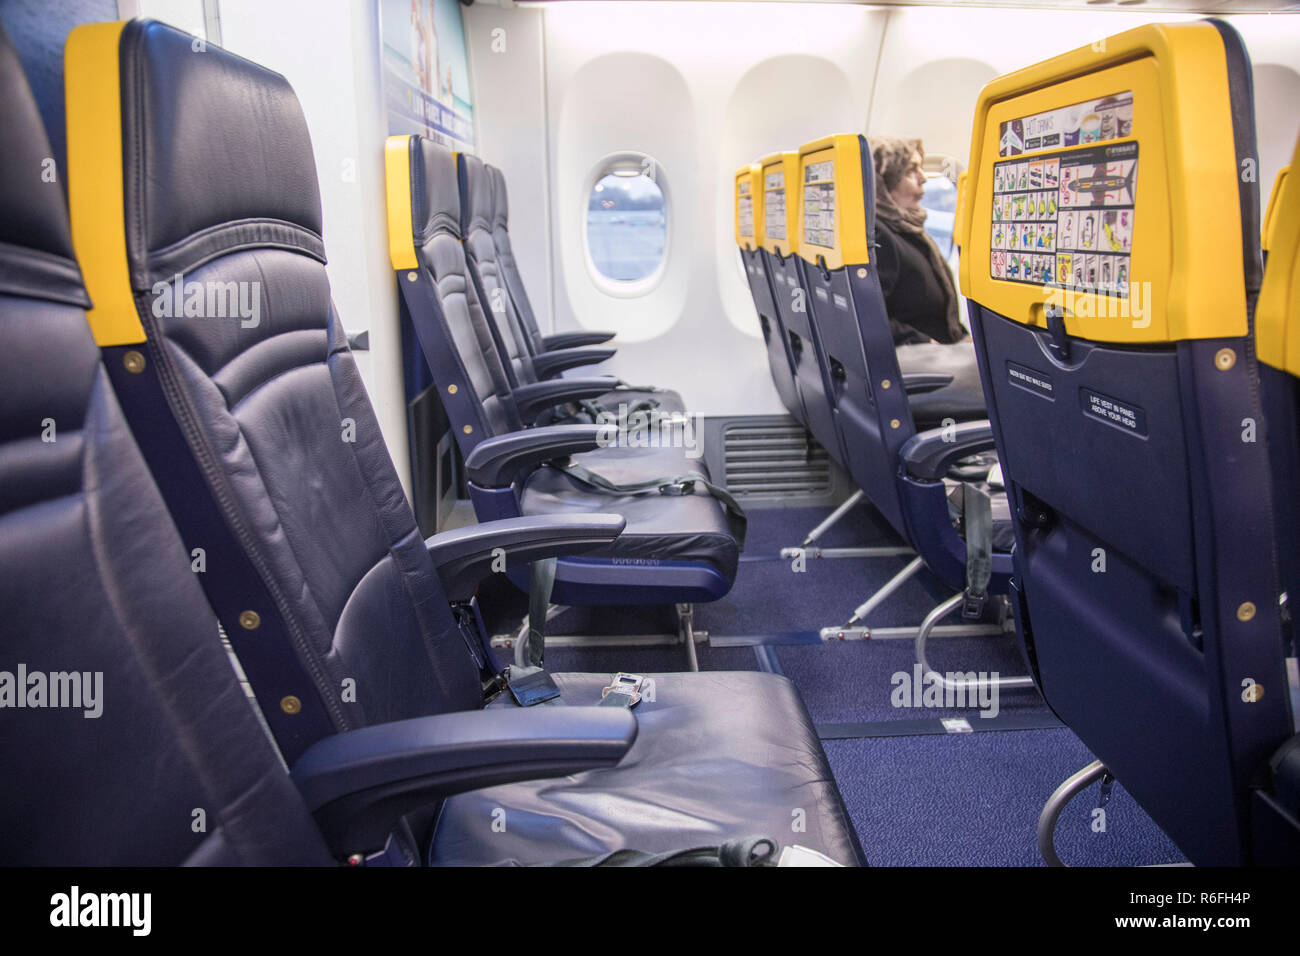 The new Boeing Sky Interior cabin of Ryanair. the aircraft is a Boeing 737-800  specifically a Boeing 737 Next Gen or 737-8AS(WL) with registration EI-FZL.  Ryanair is a low cost carrier based